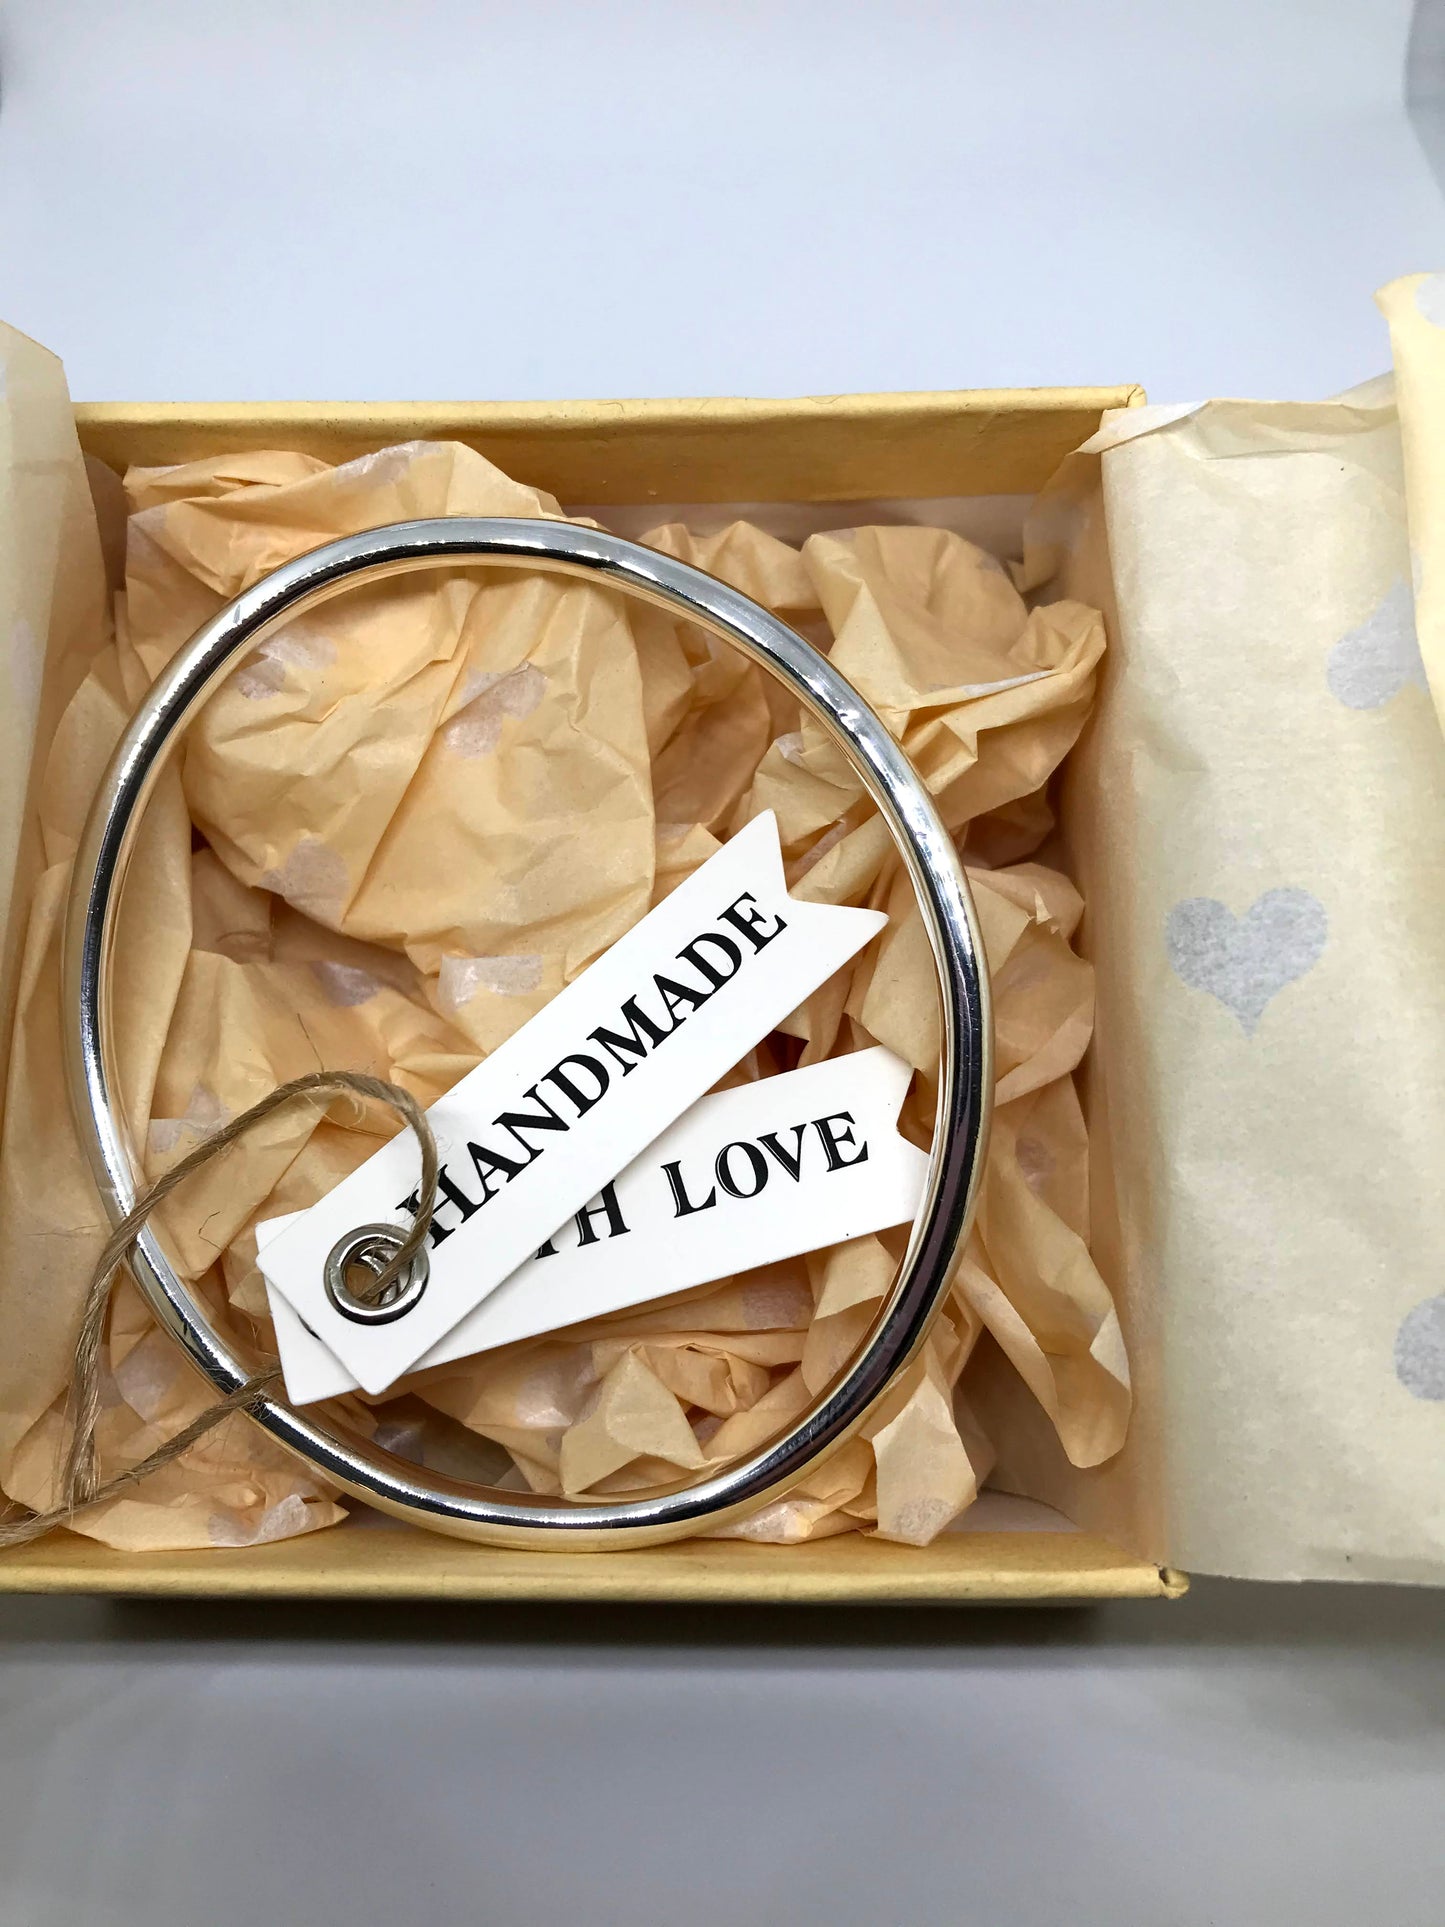 925 sterling silver handmade bangle in a recycled brown cardboard box with cute love heart tissue paper insert